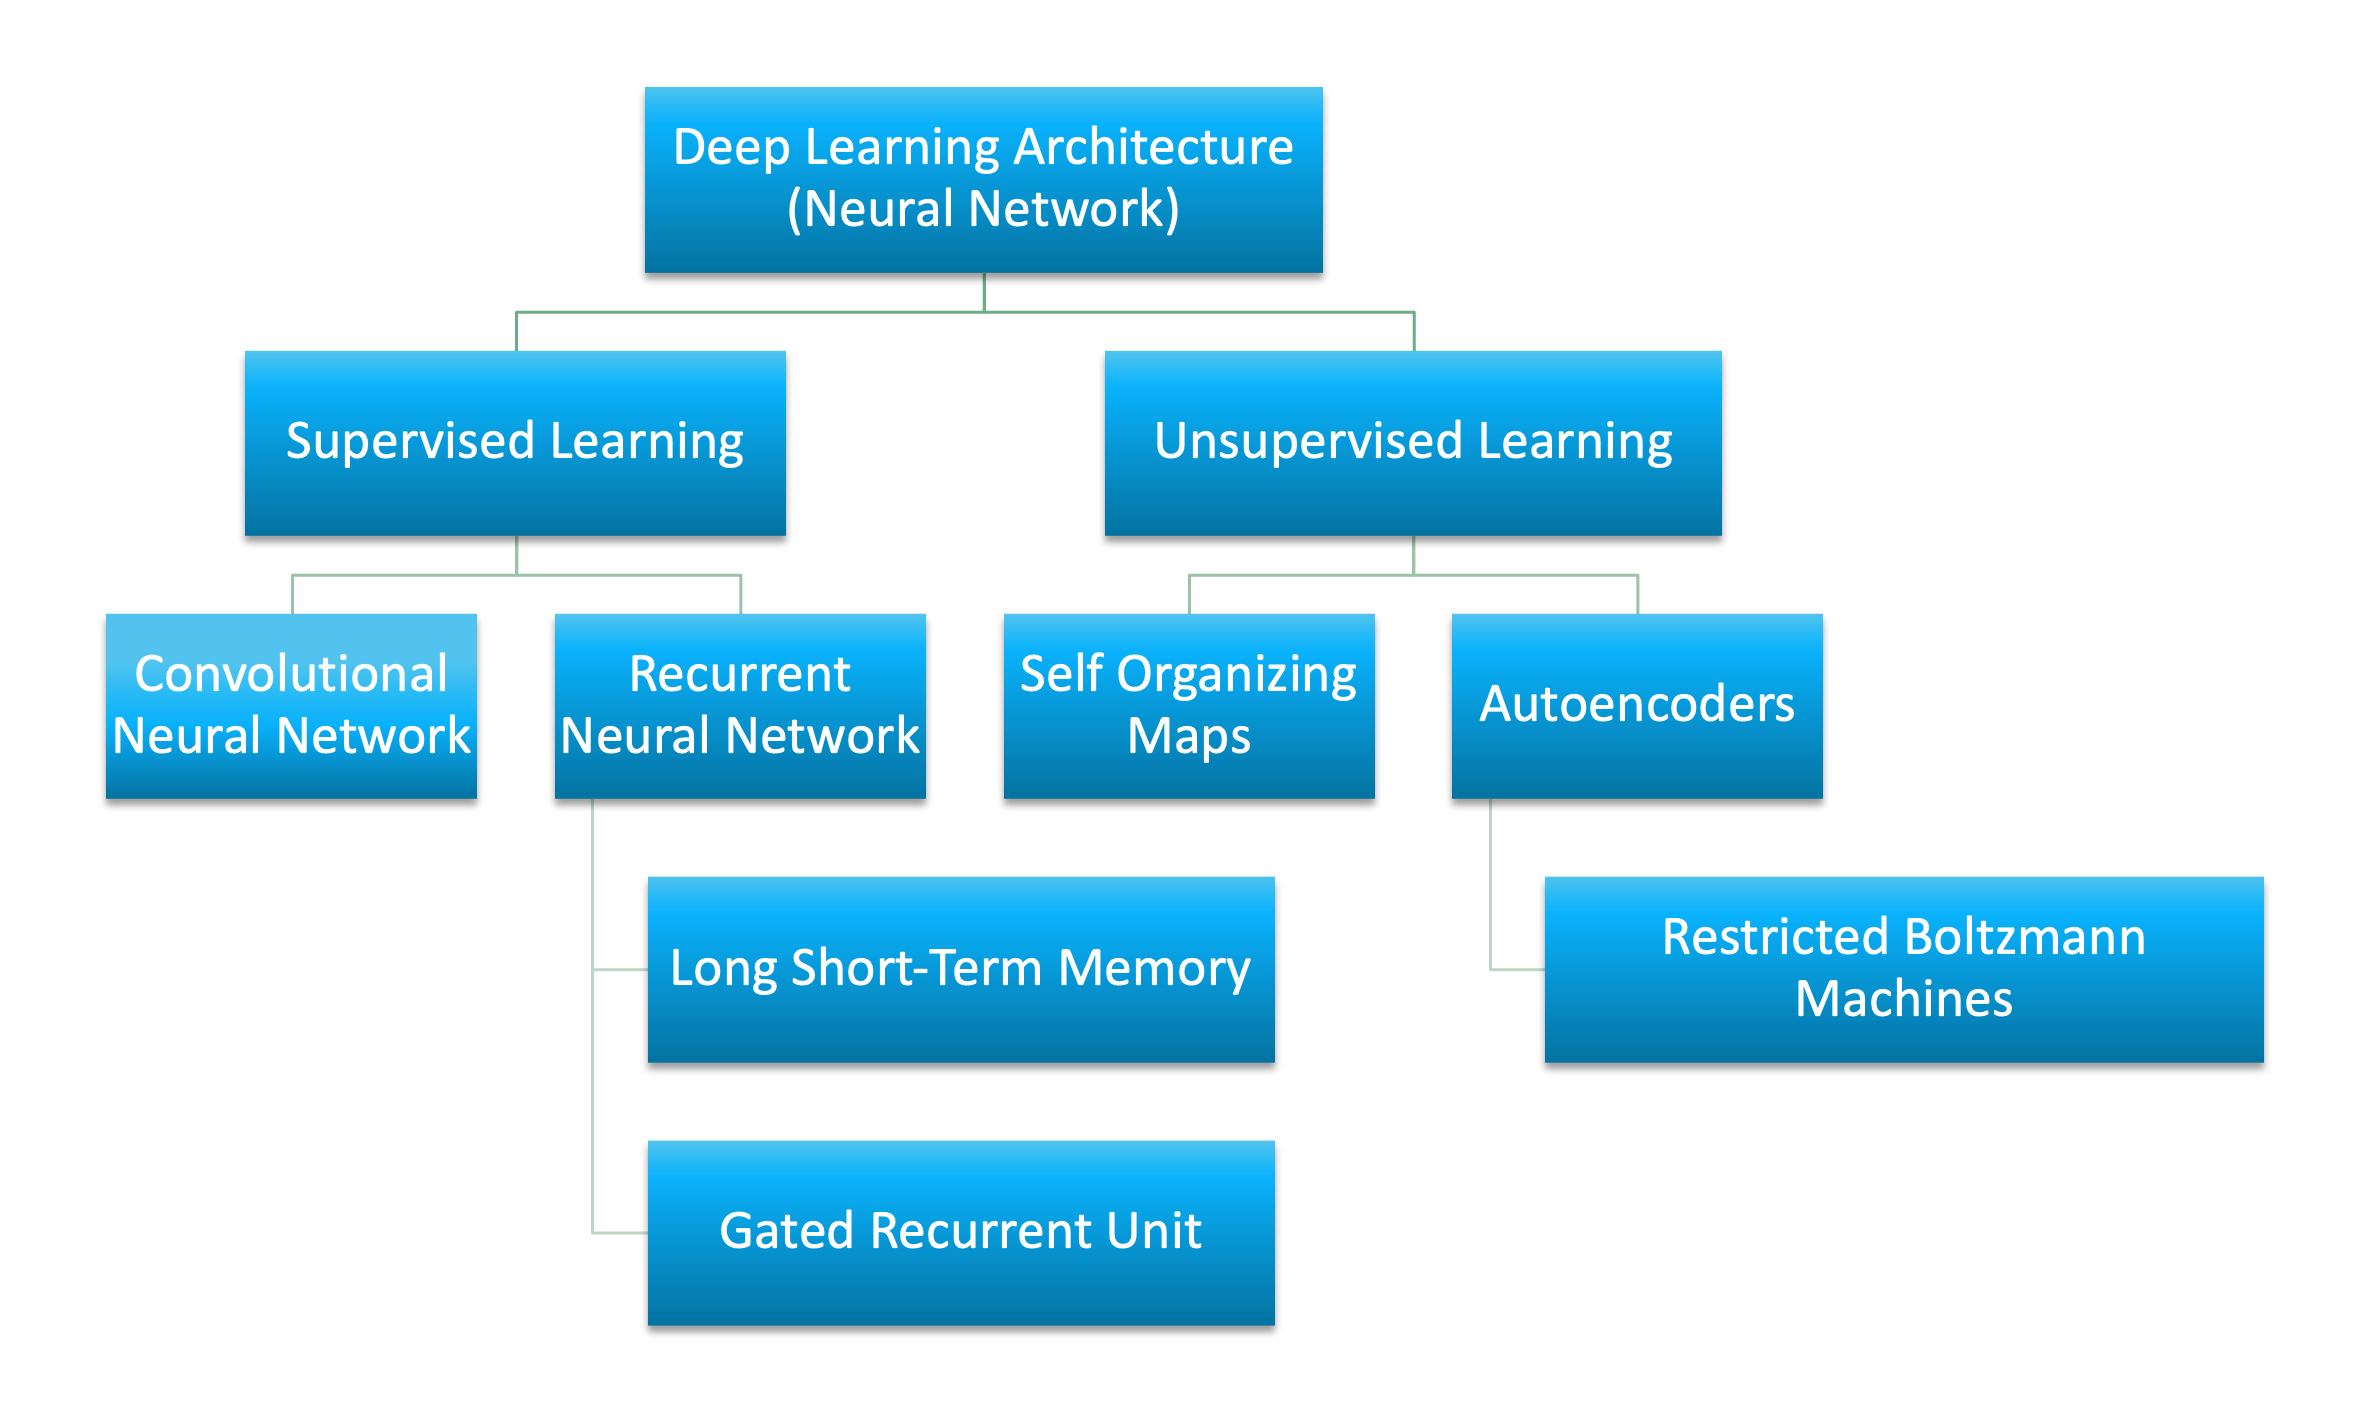 Advanced Deep Learning architectures